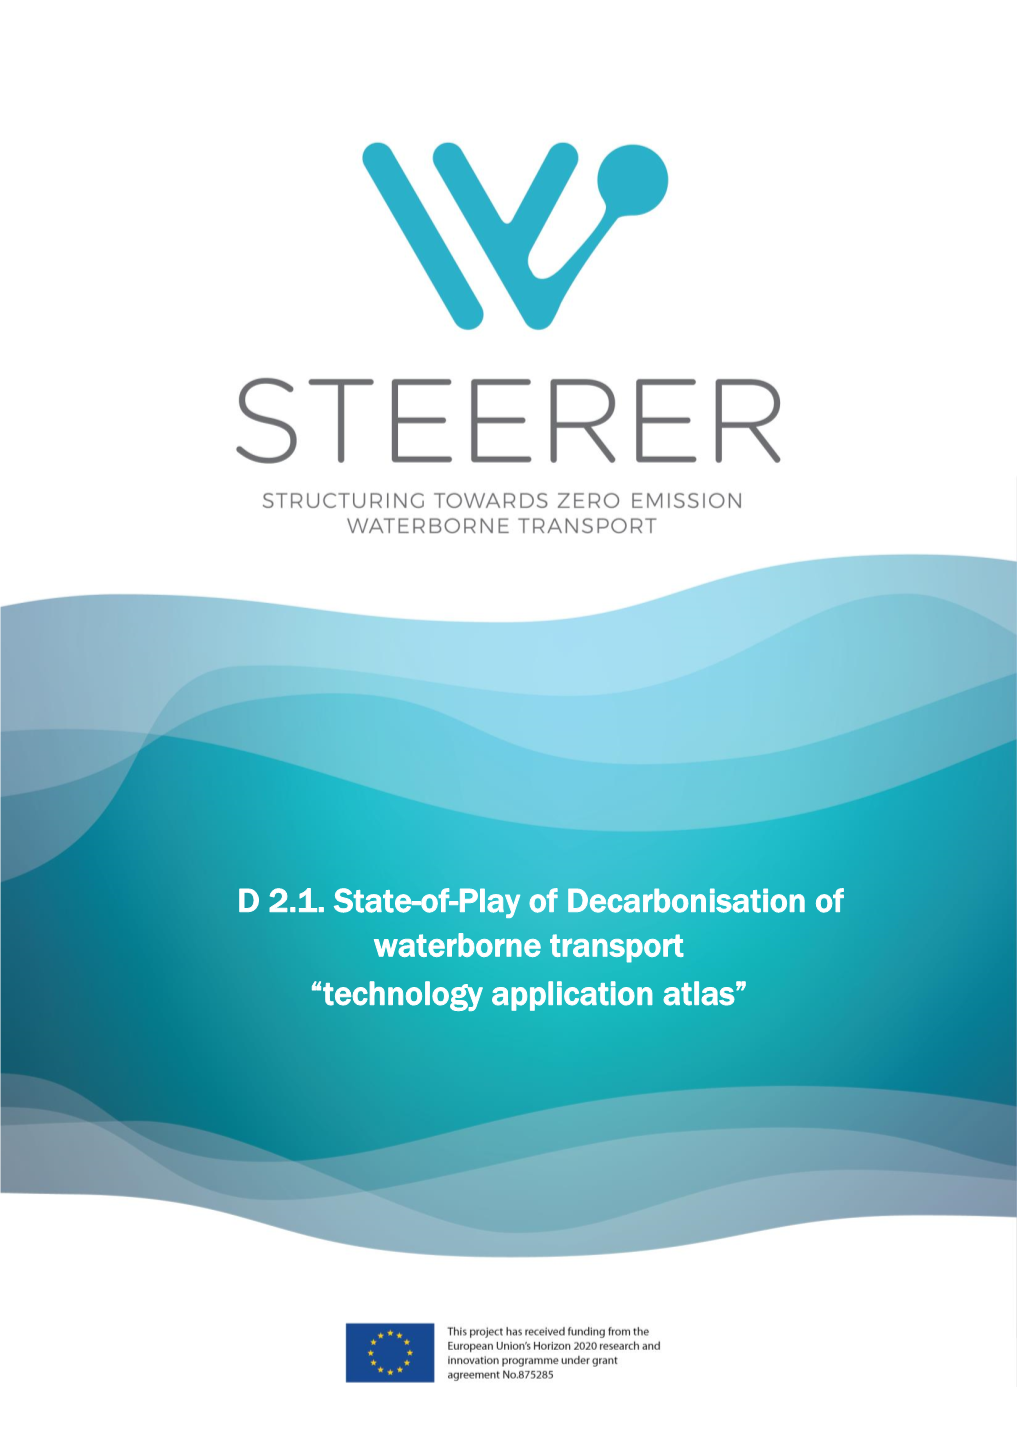 D 2.1. State-Of-Play of Decarbonisation of Waterborne Transport “Technology Application Atlas”